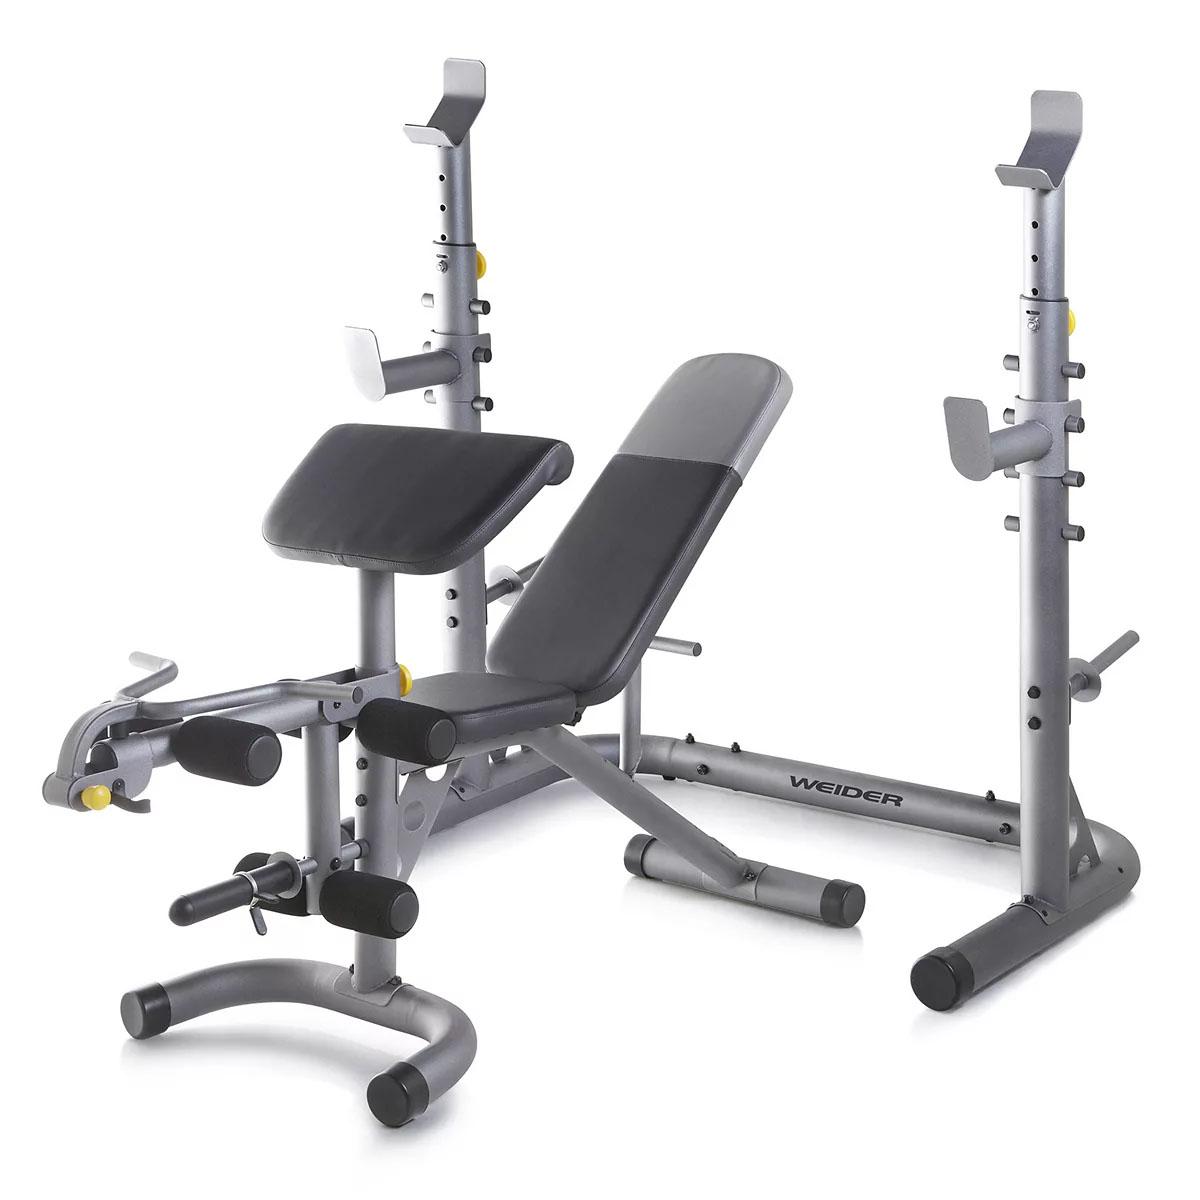 Weider Olympic Workout Bench with Squat Rack with $40 Kohls Cash for $199.99 Shipped